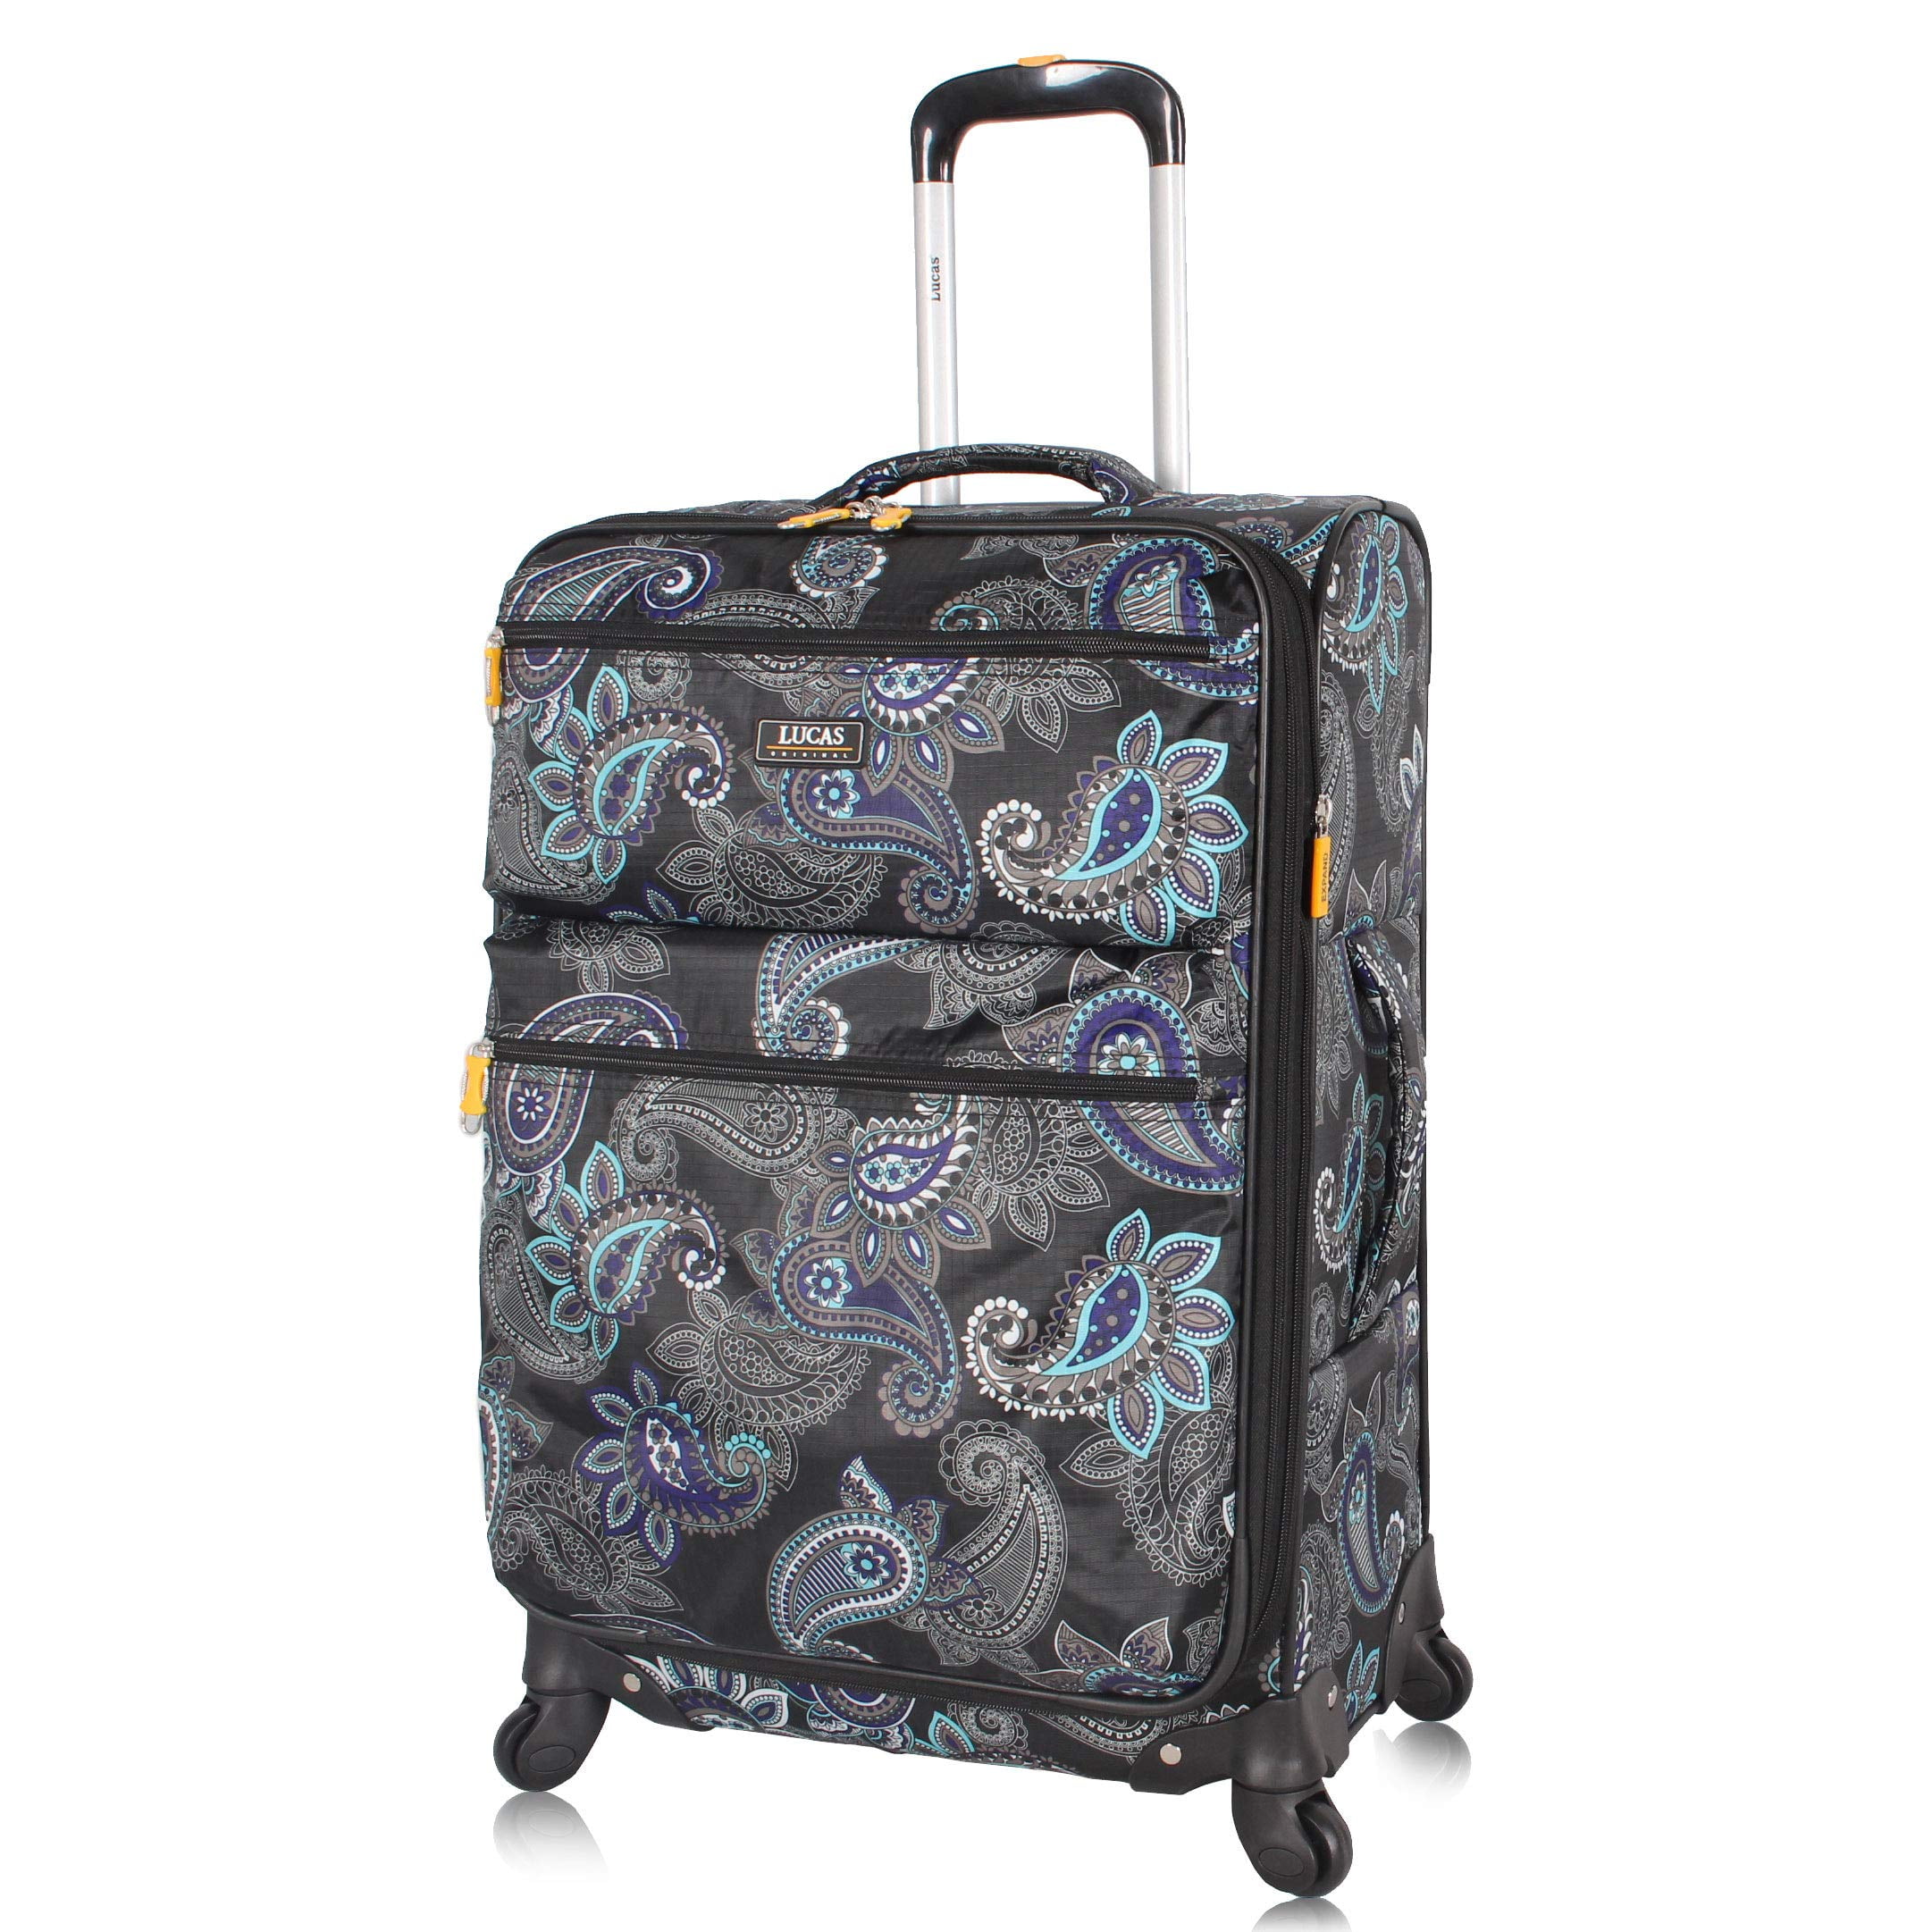 Lucas Designer Luggage Carry On Collection - Expandable 20 Inch 